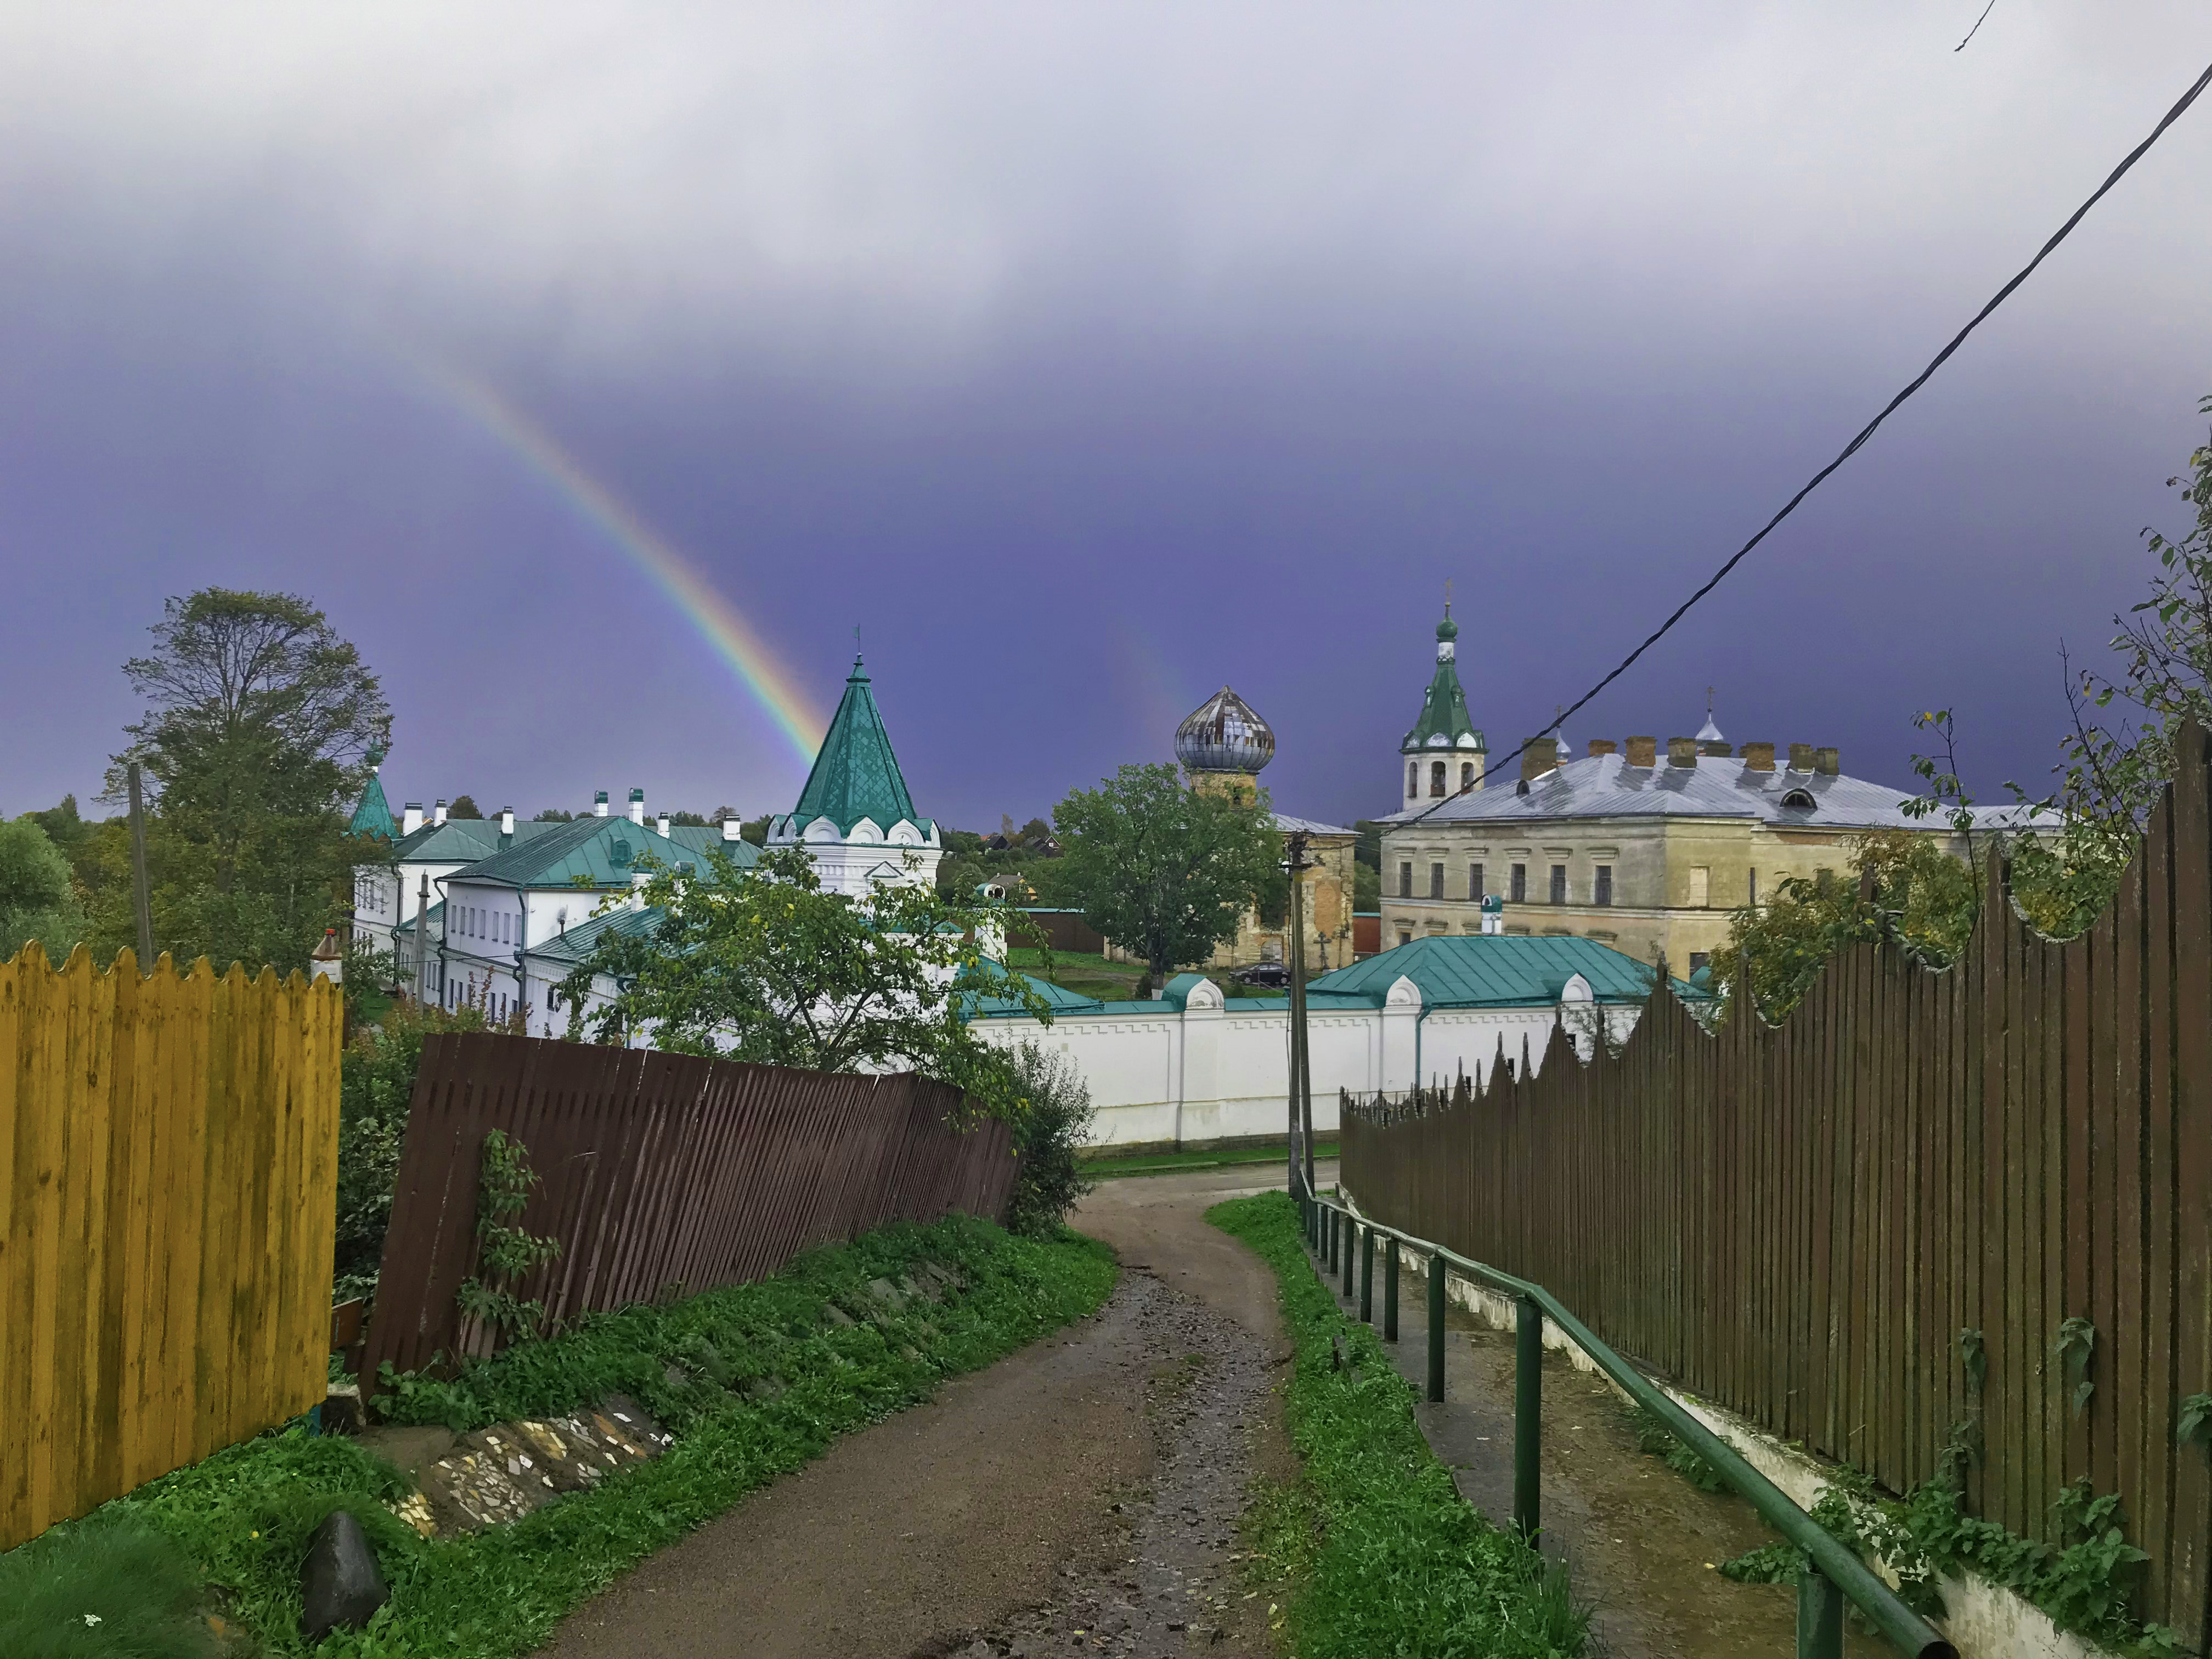 A small dirt alley situated between two wooden fences looks out towards the green and white St. Nicholas monastery. The sky is stormy and a rainbow peeks through the gray.